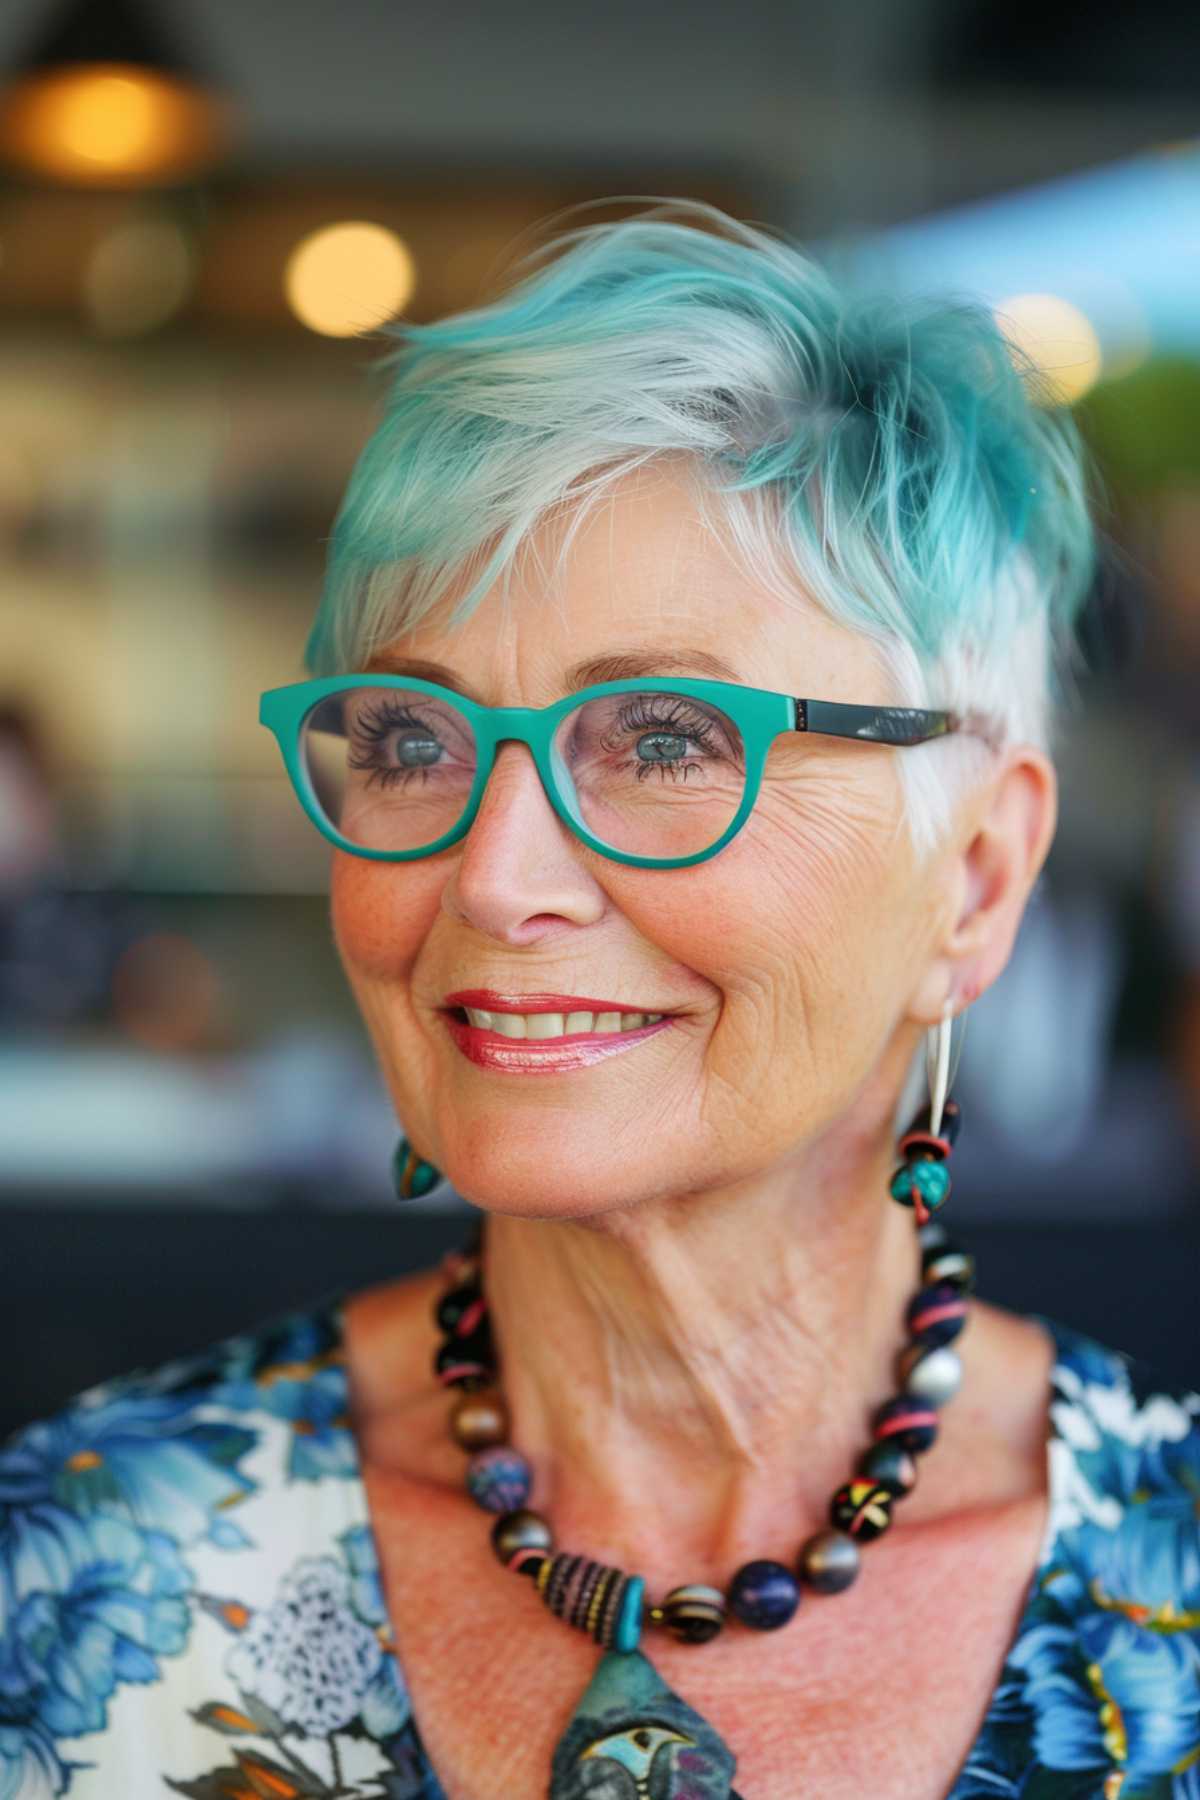 A bold pixie cut with turquoise highlights and glasses gives this hairstyle a fun and youthful look.